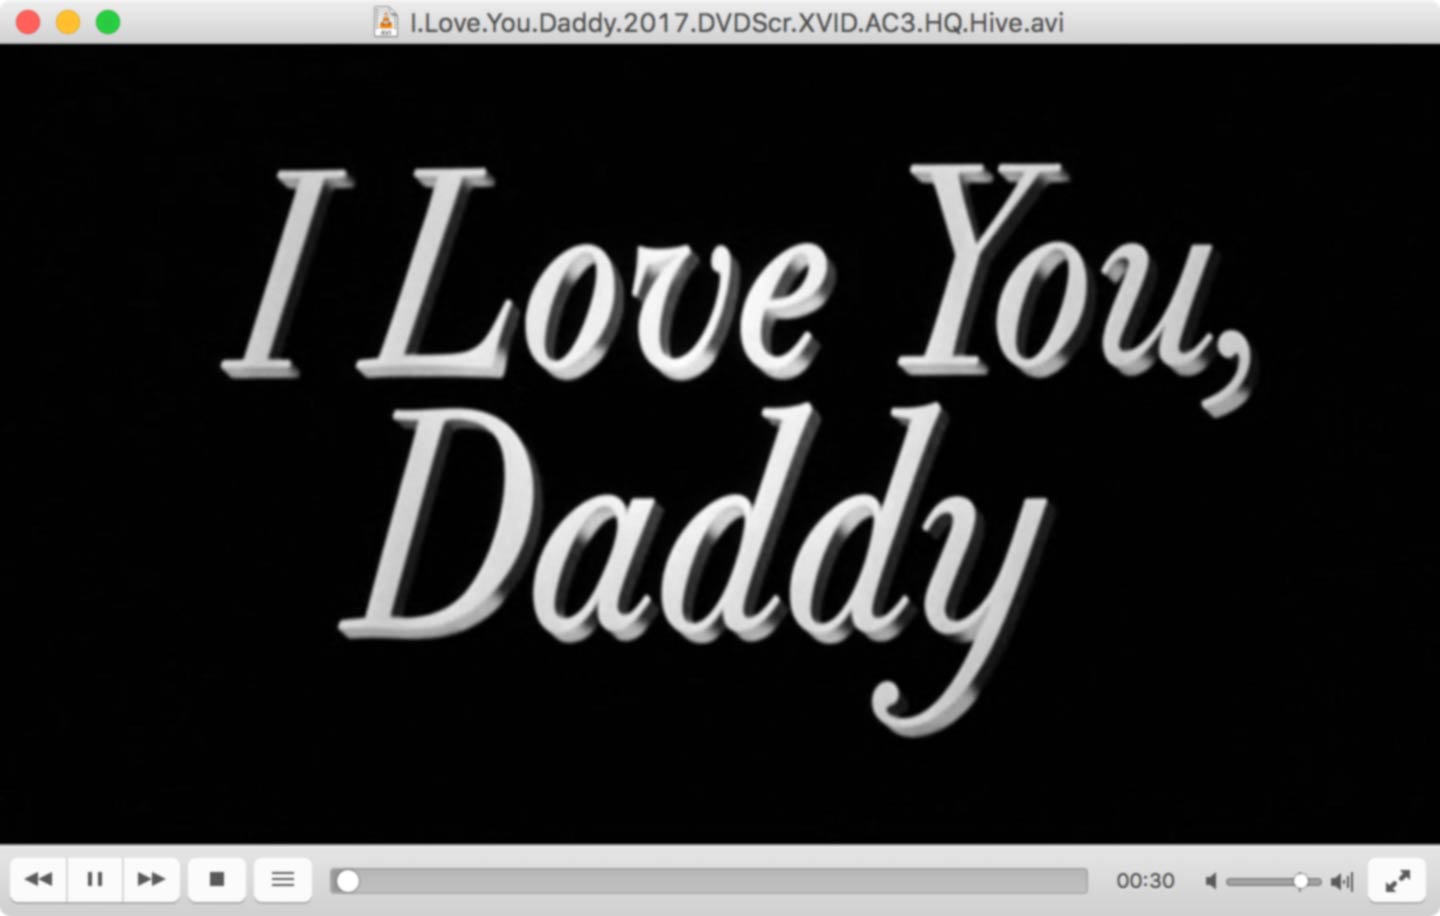 How People Are Illegally Downloading Louis C.K.'s 'I Love You Daddy' Movie